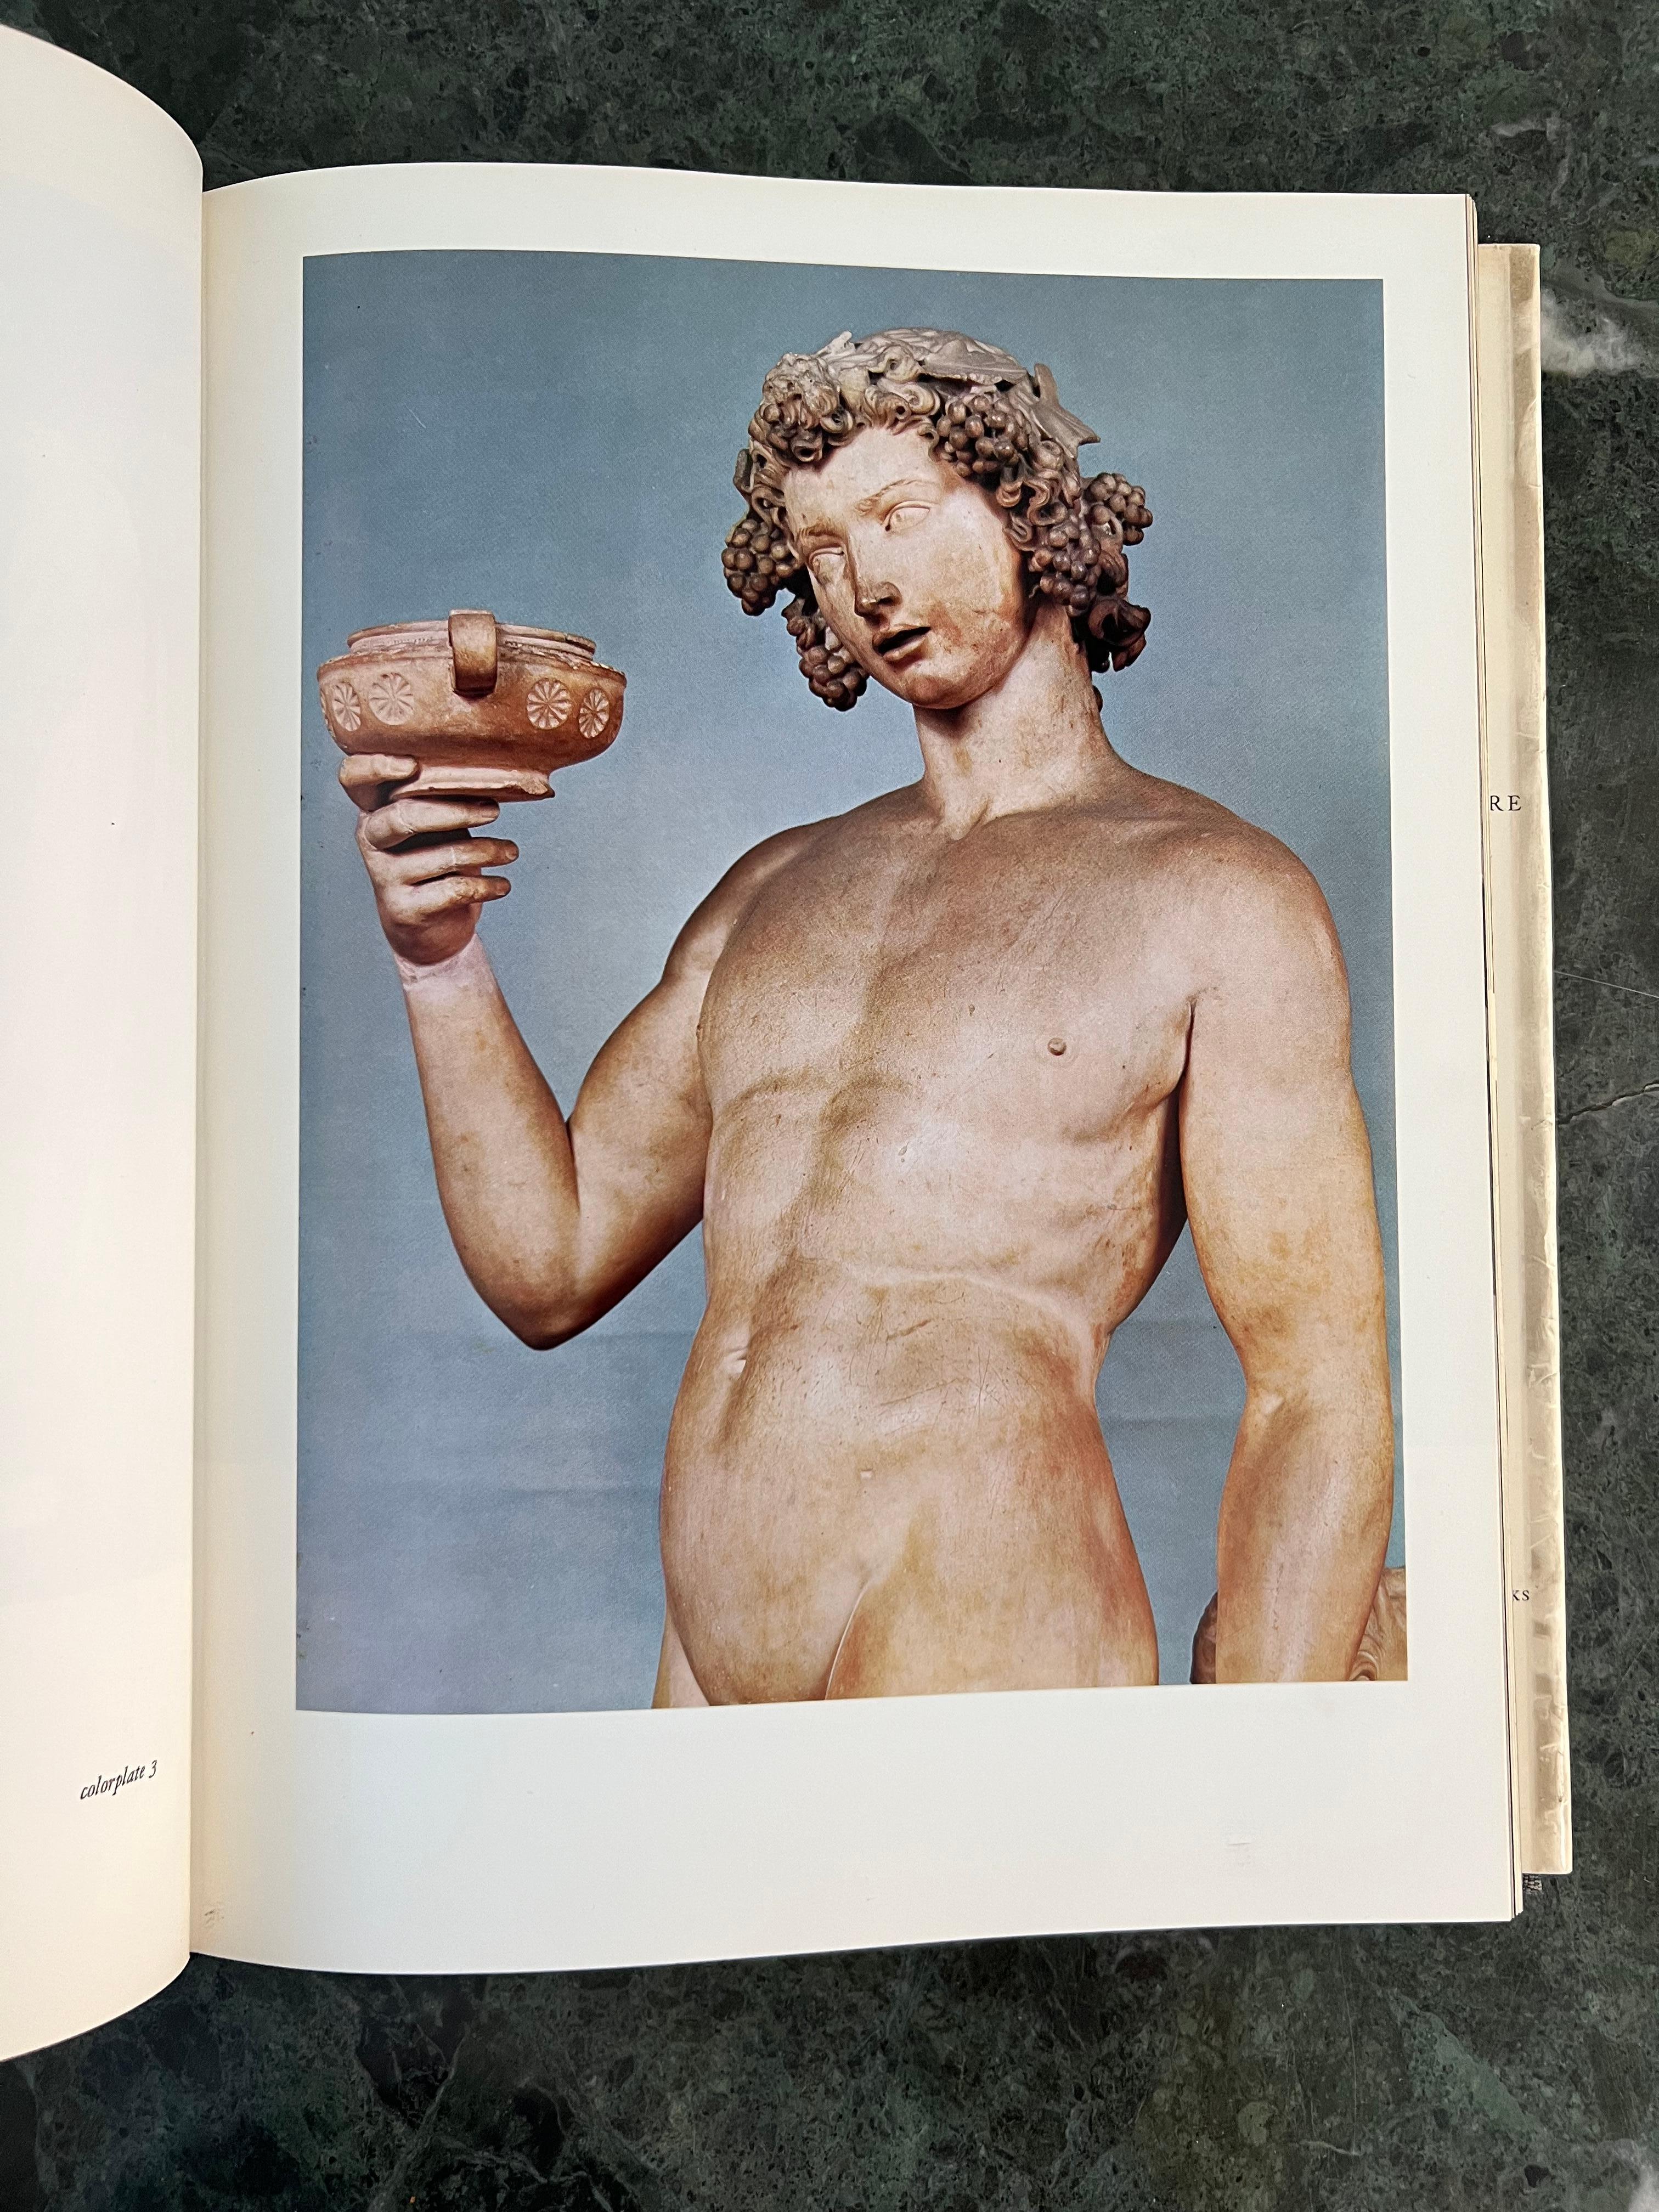 Paper Large Collectible Art Book “Michelangelo: The Complete Sculpture”, 1982 For Sale